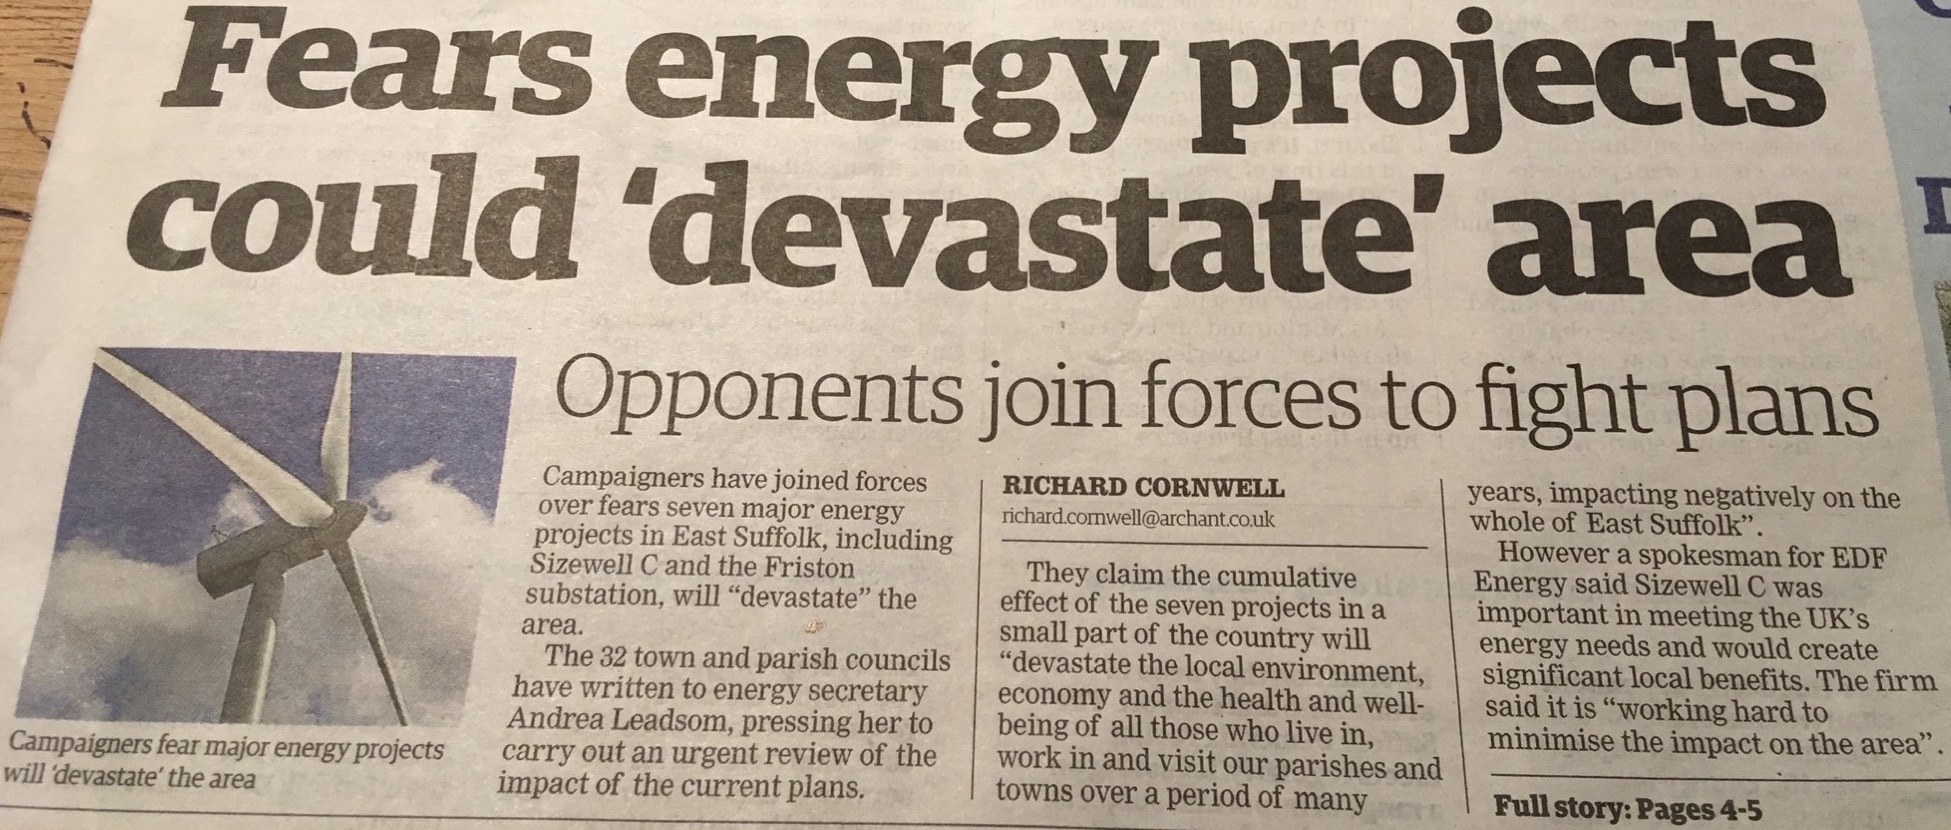 Energy could 'devastate' area